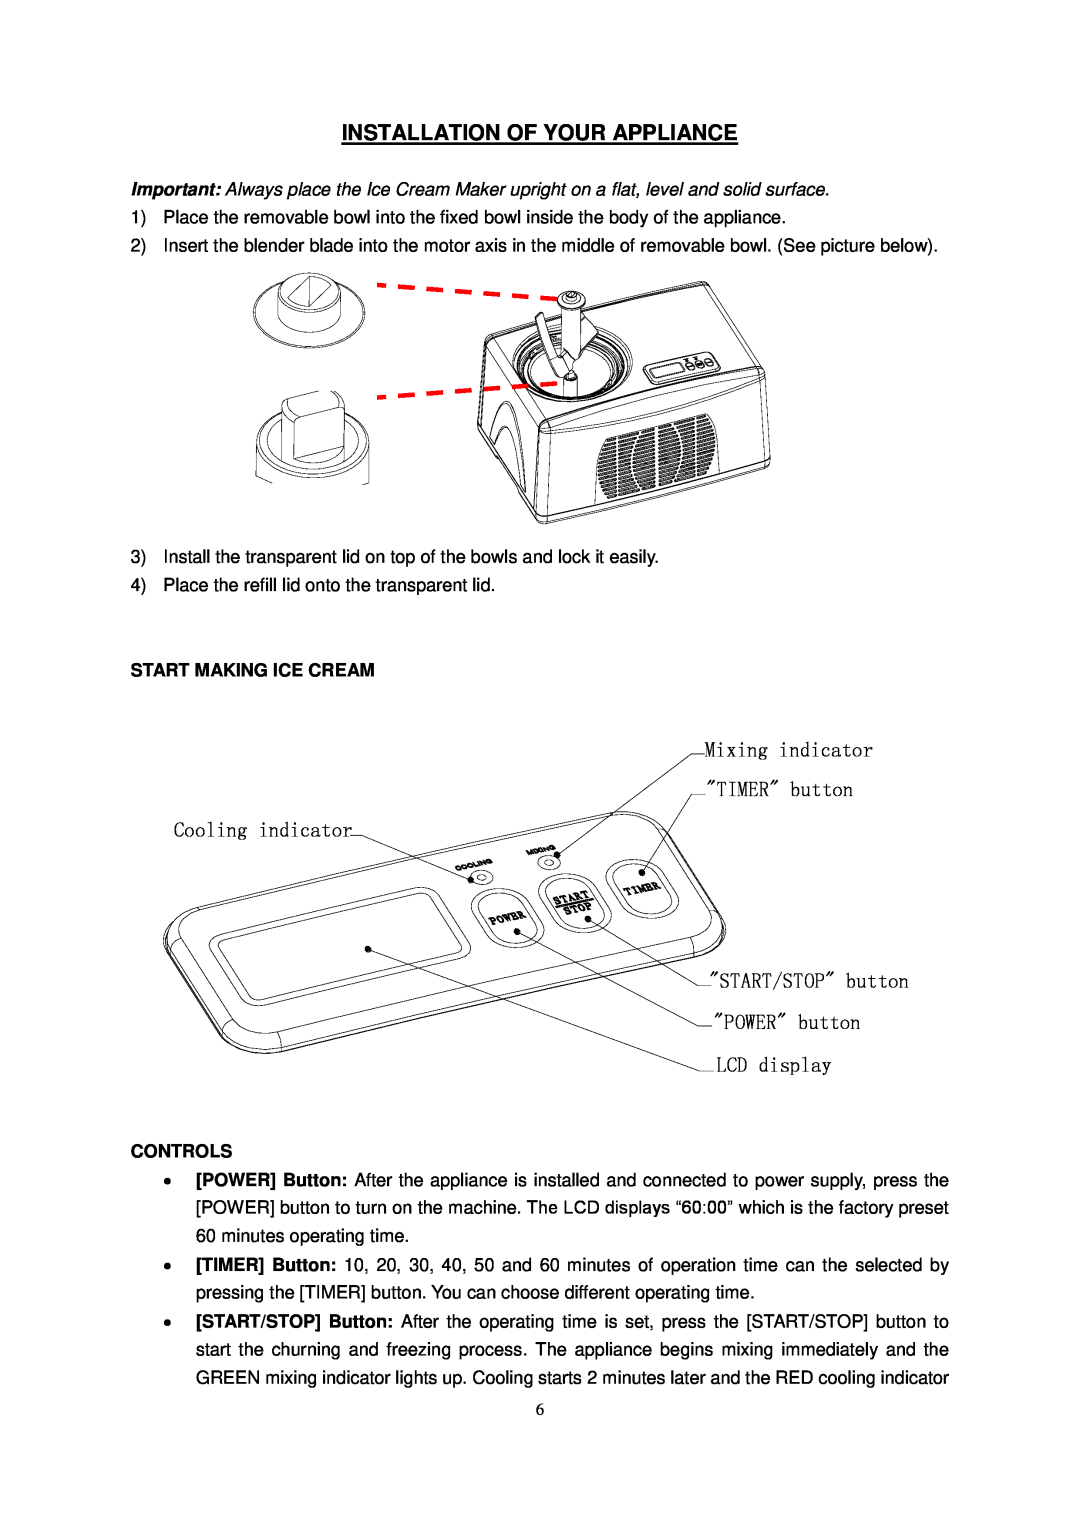 Whynter ICM-15LS instruction manual Installation Of Your Appliance, Start Making Ice Cream, Controls 